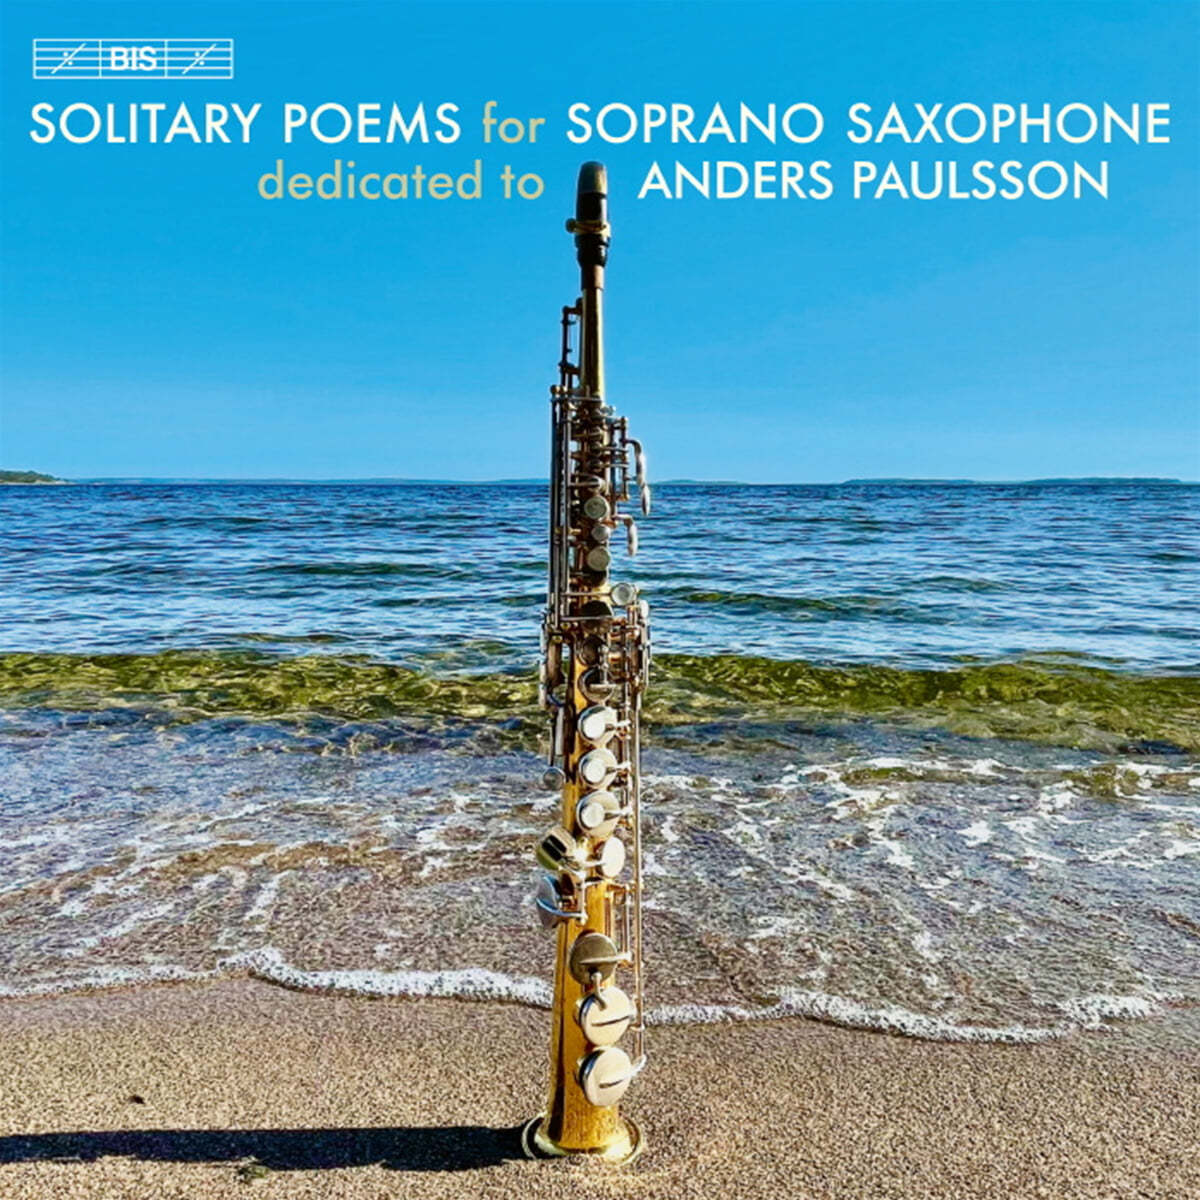 Anders Paulsson 소프라노 색소폰을 위한 고독한 시 (Solitary Poems For Soprano Saxophone)